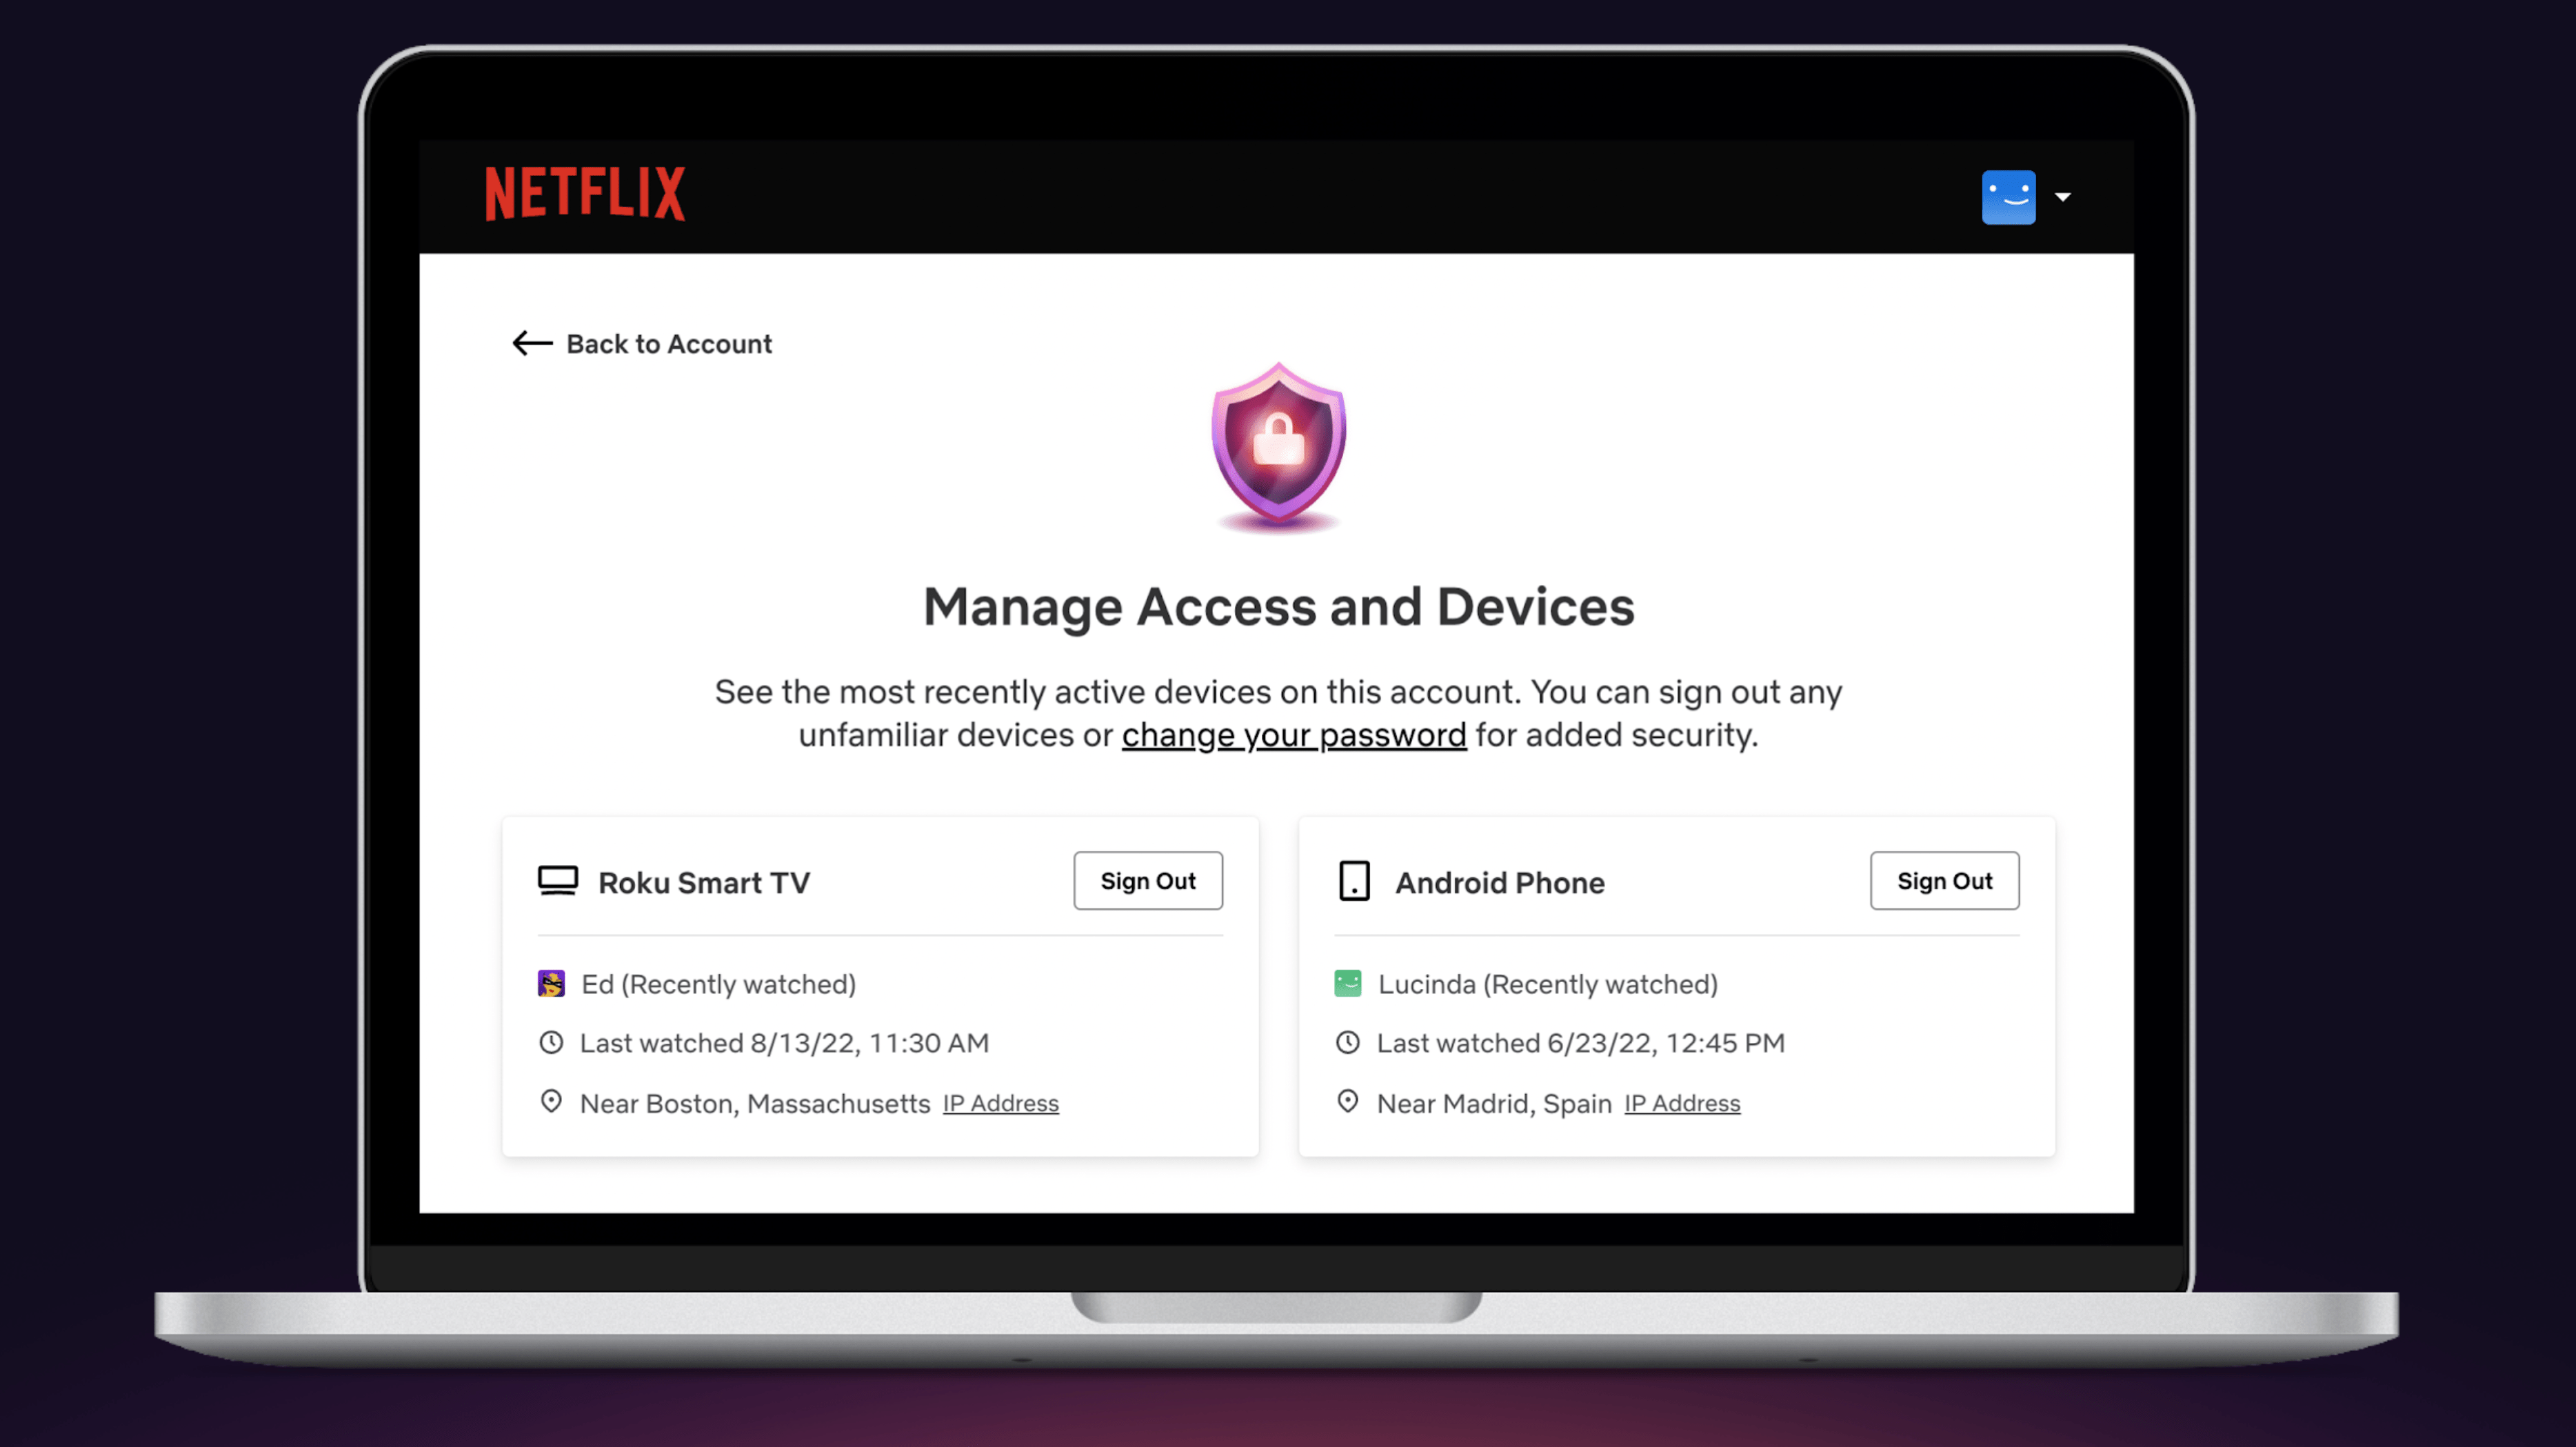 Netflix showed how users can sign out other profiles on select devices, which may be a first step for how the company plans to introduce password sharing restrictions. (Image: Netflix)